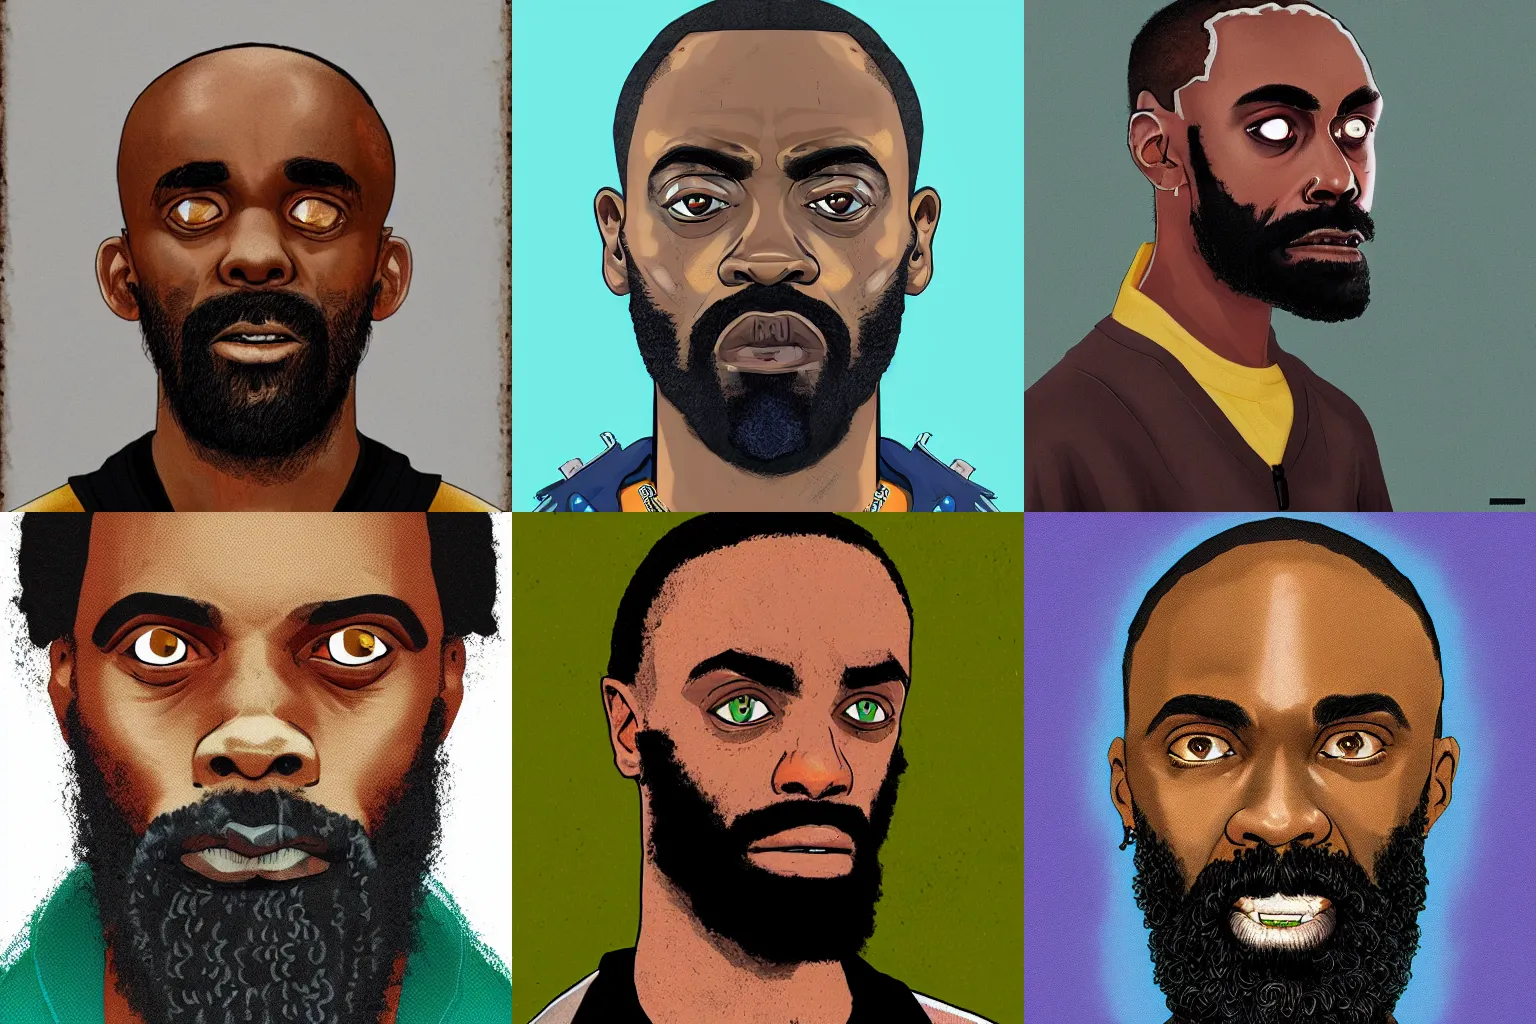 Prompt: mc ride, stefan corbin burnett, from death grips in the style of a disco elysium character portrait